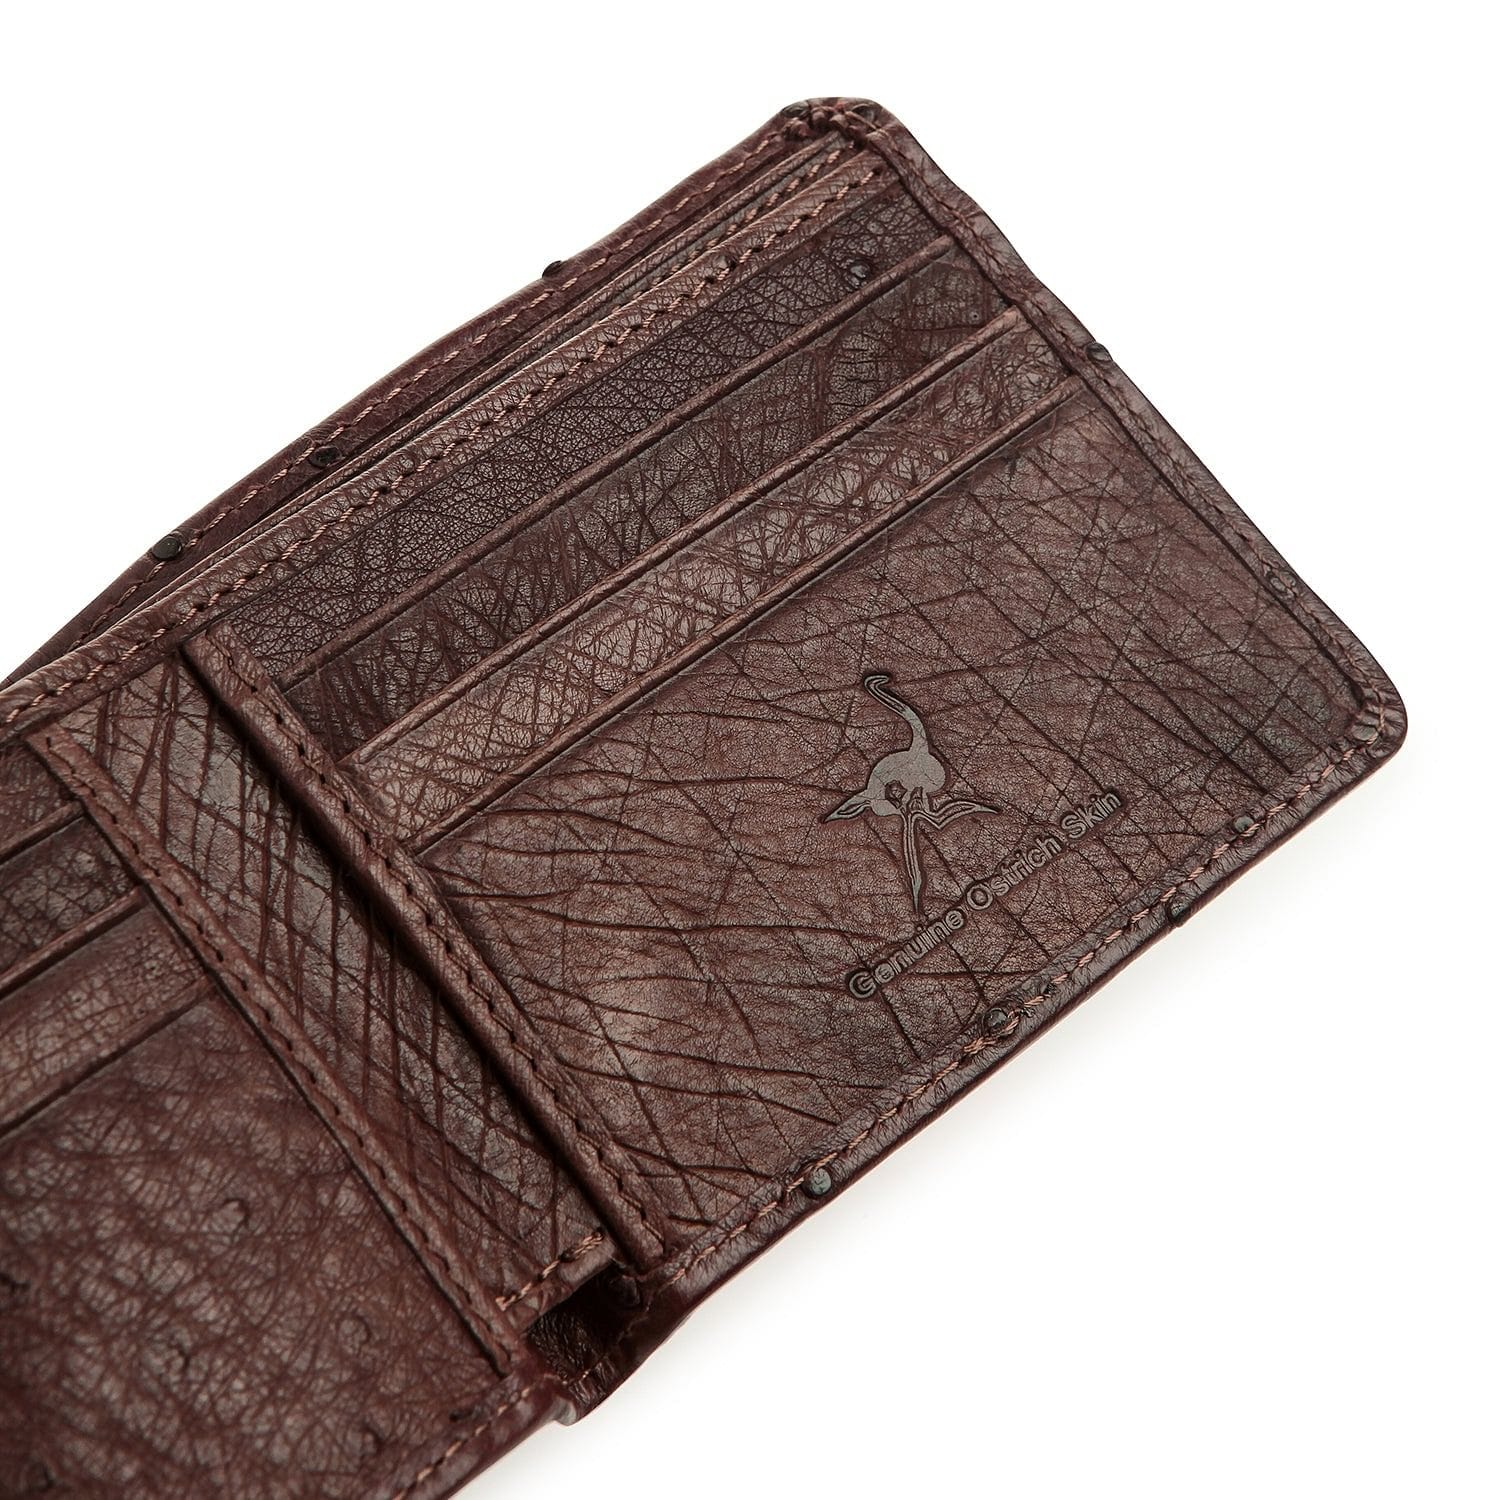 Multiple Wallet Ostrich Leather - Men - Small Leather Goods